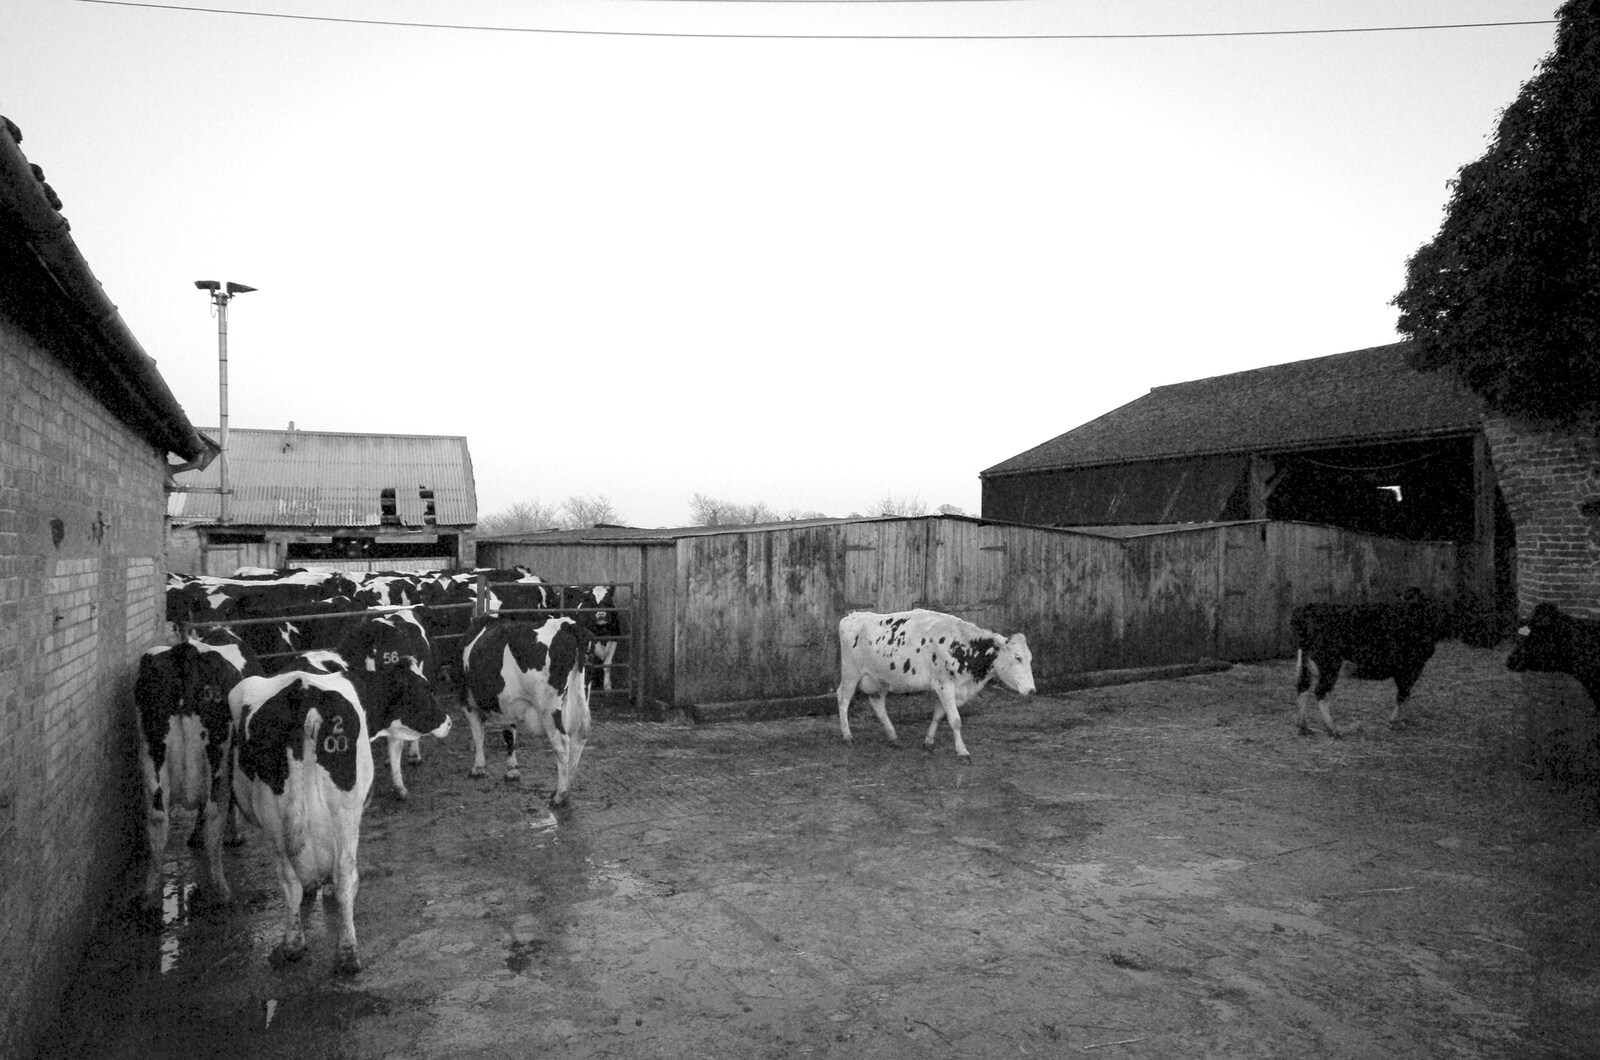 Outside, cows mill around from The Last Milking at Dairy Farm, Thrandeston, Suffolk - 11th January 2007